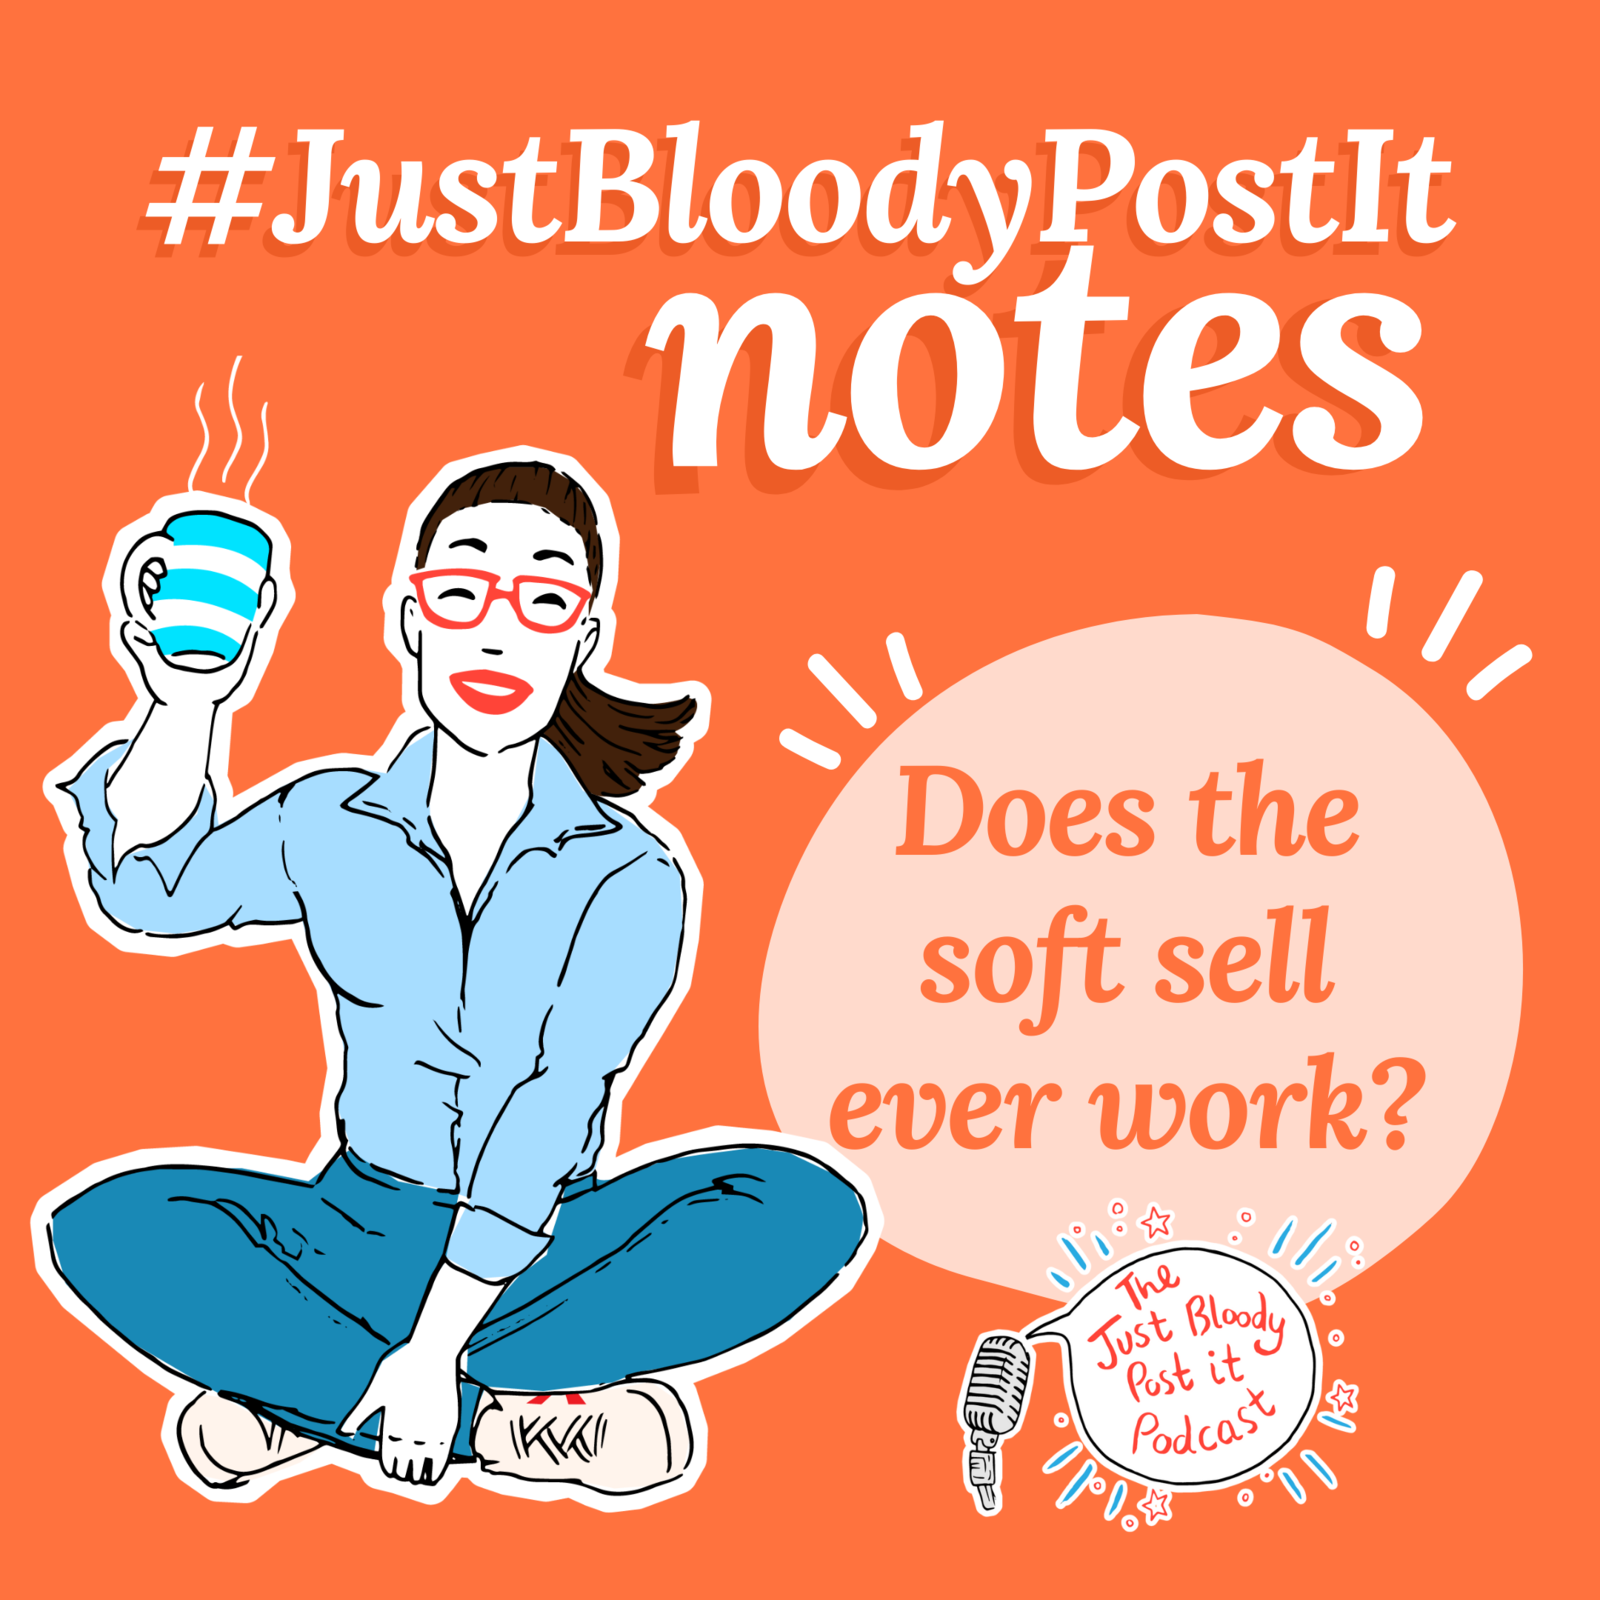 S4 Ep64: Does the soft sell ever really work? A #JustBloodyPostIt Note